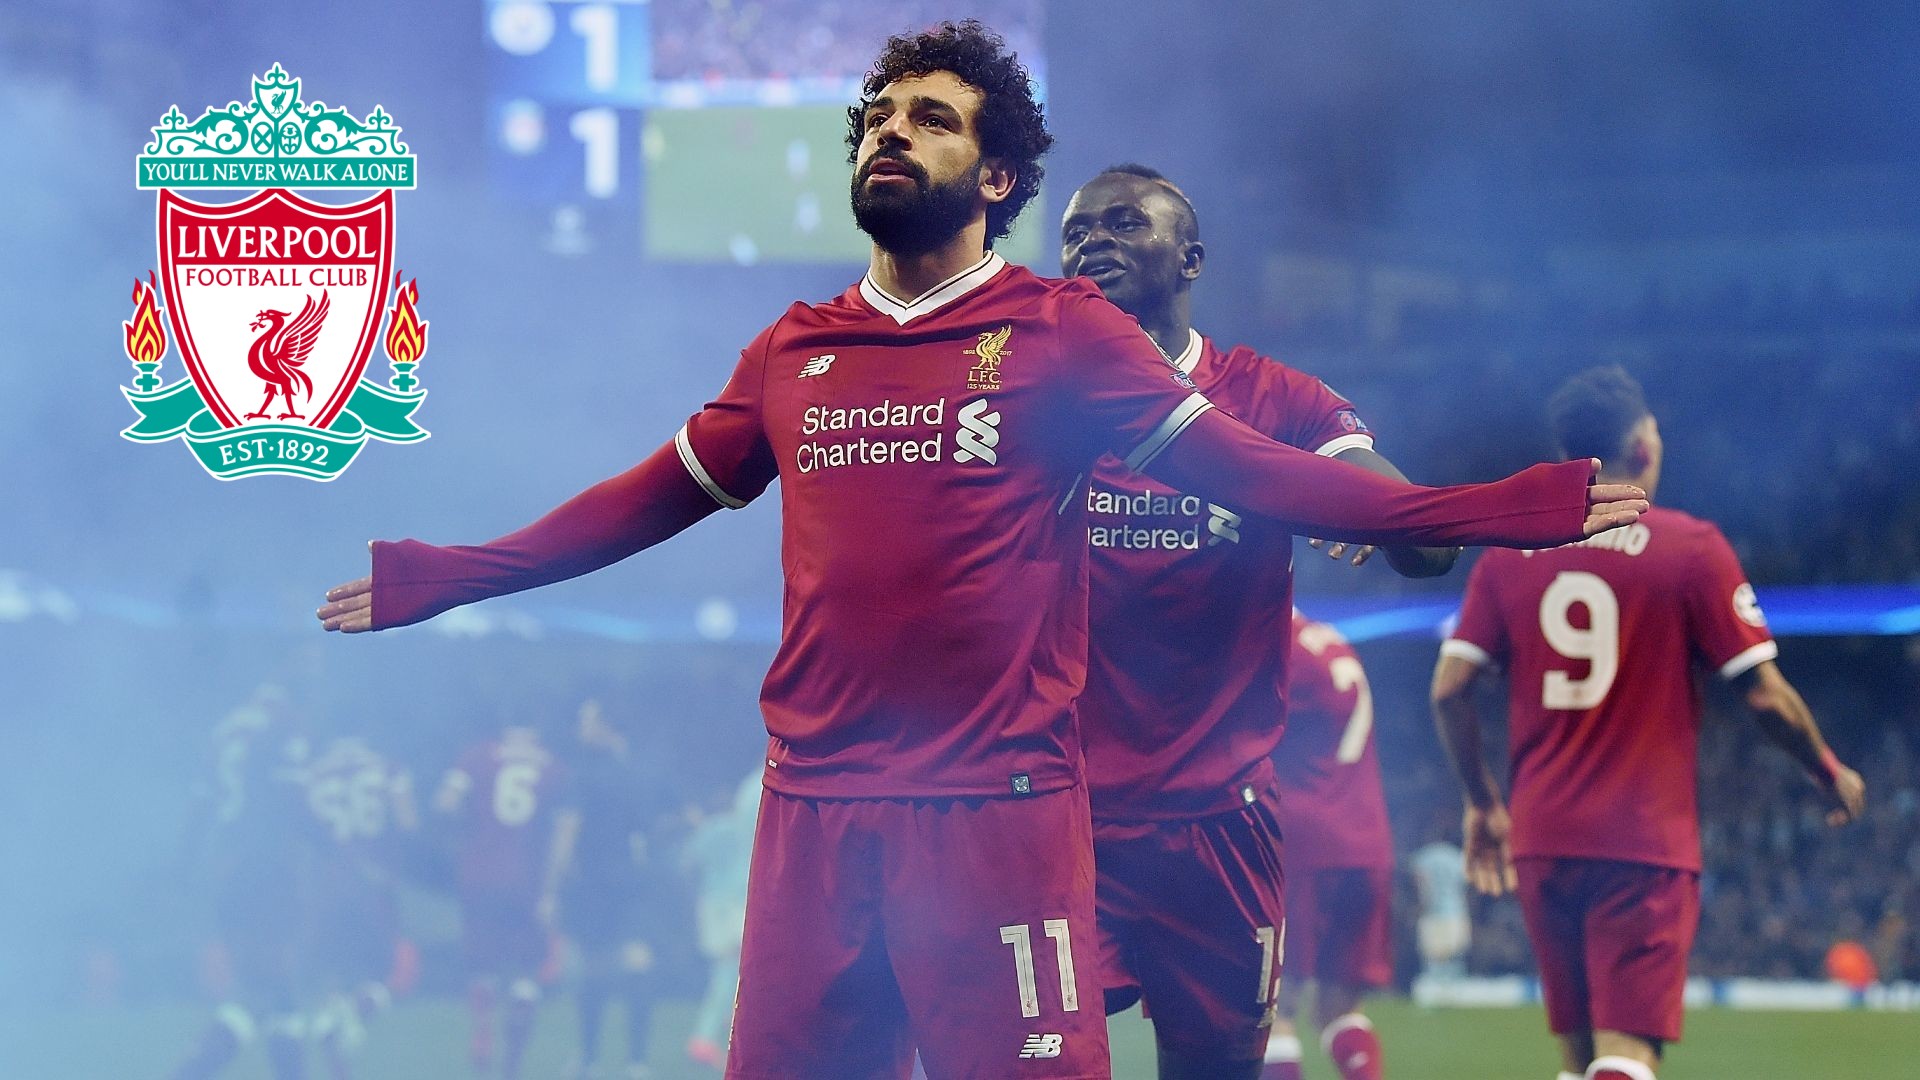 Mohamed Salah Wallpaper For Desktop with image resolution 1920x1080 pixel. You can use this wallpaper as background for your desktop Computer Screensavers, Android or iPhone smartphones